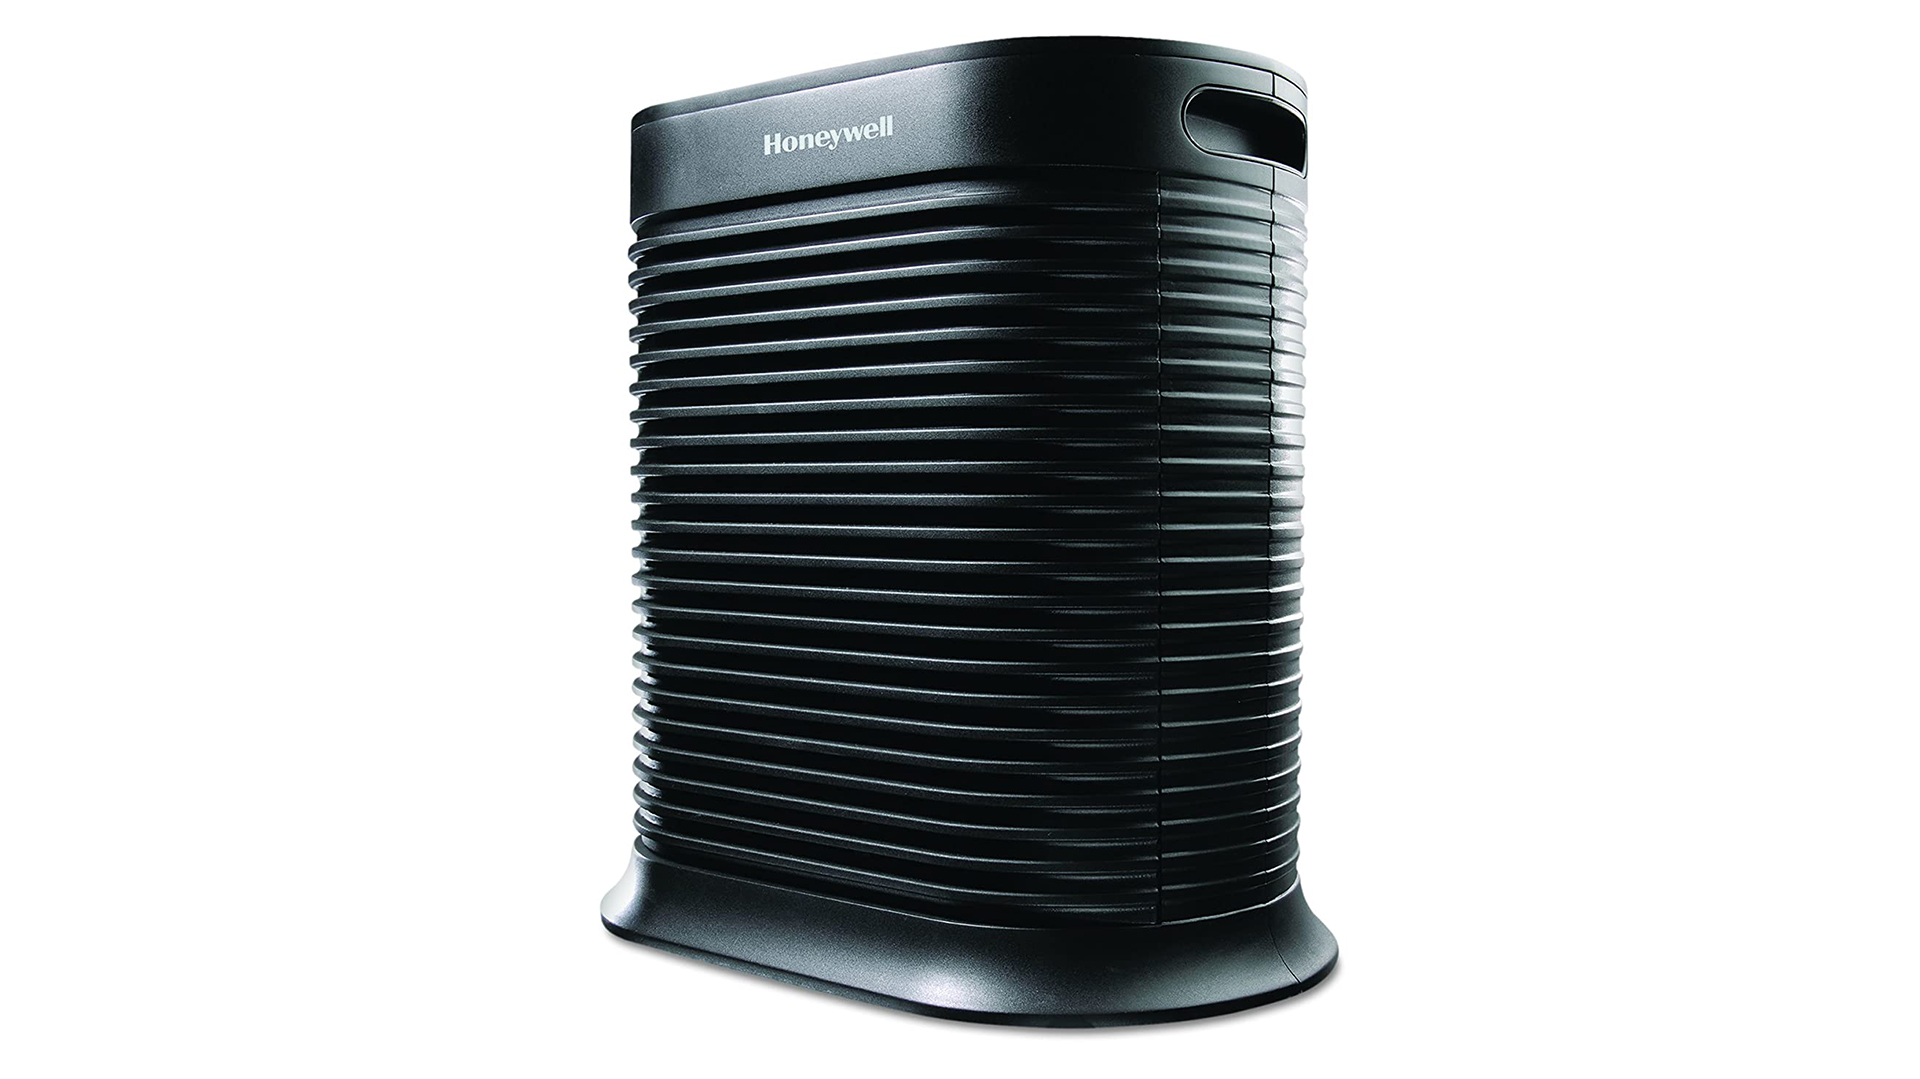 Air purifiers on sale: Product image of a Honeywell air purifier